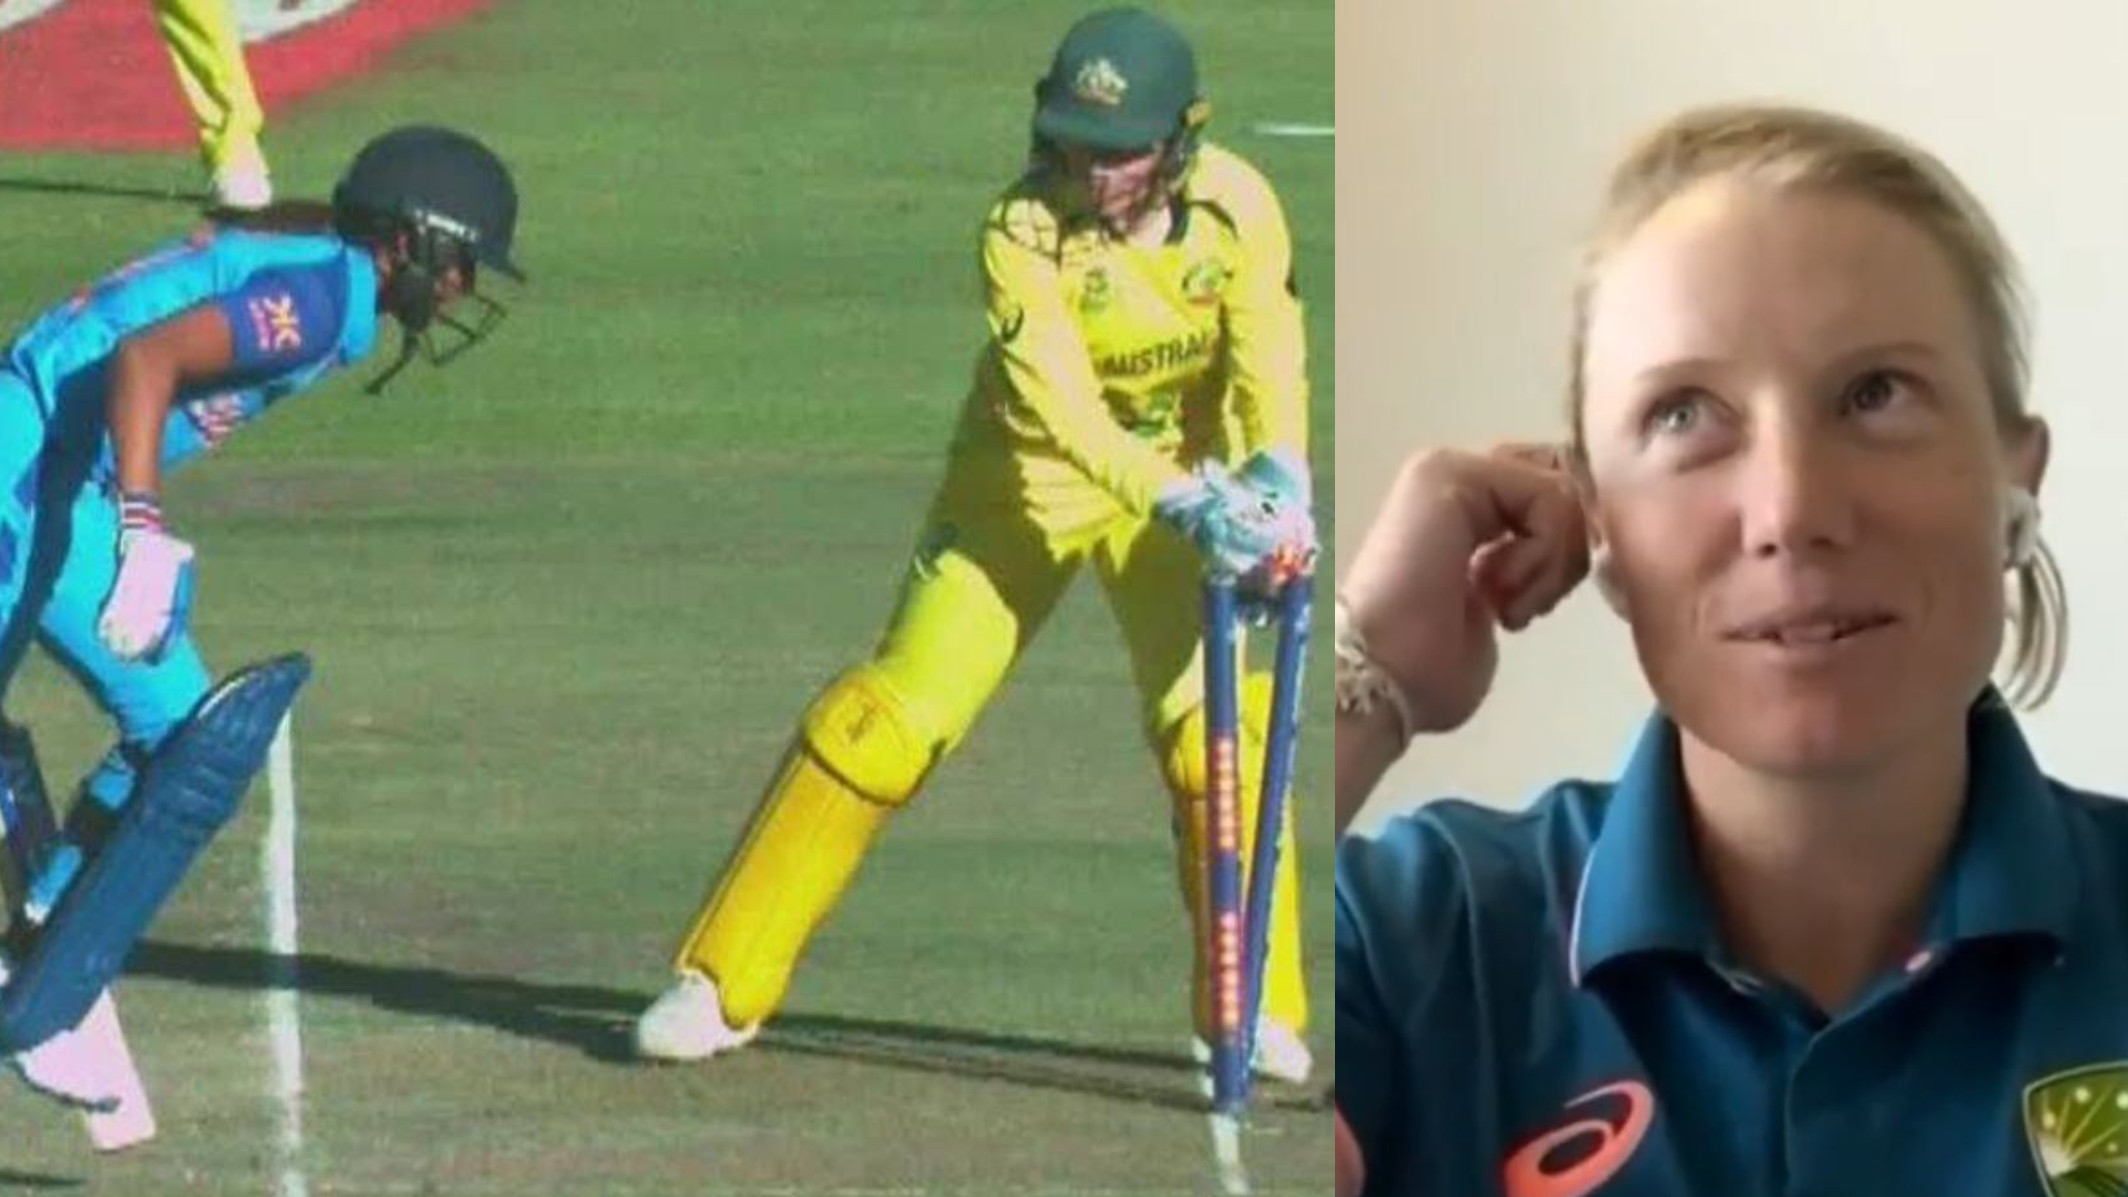 WATCH- “You could say you're unlucky, but it’s about effort”- Alyssa Healy slams Harmanpreet Kaur on her run out in semifinal